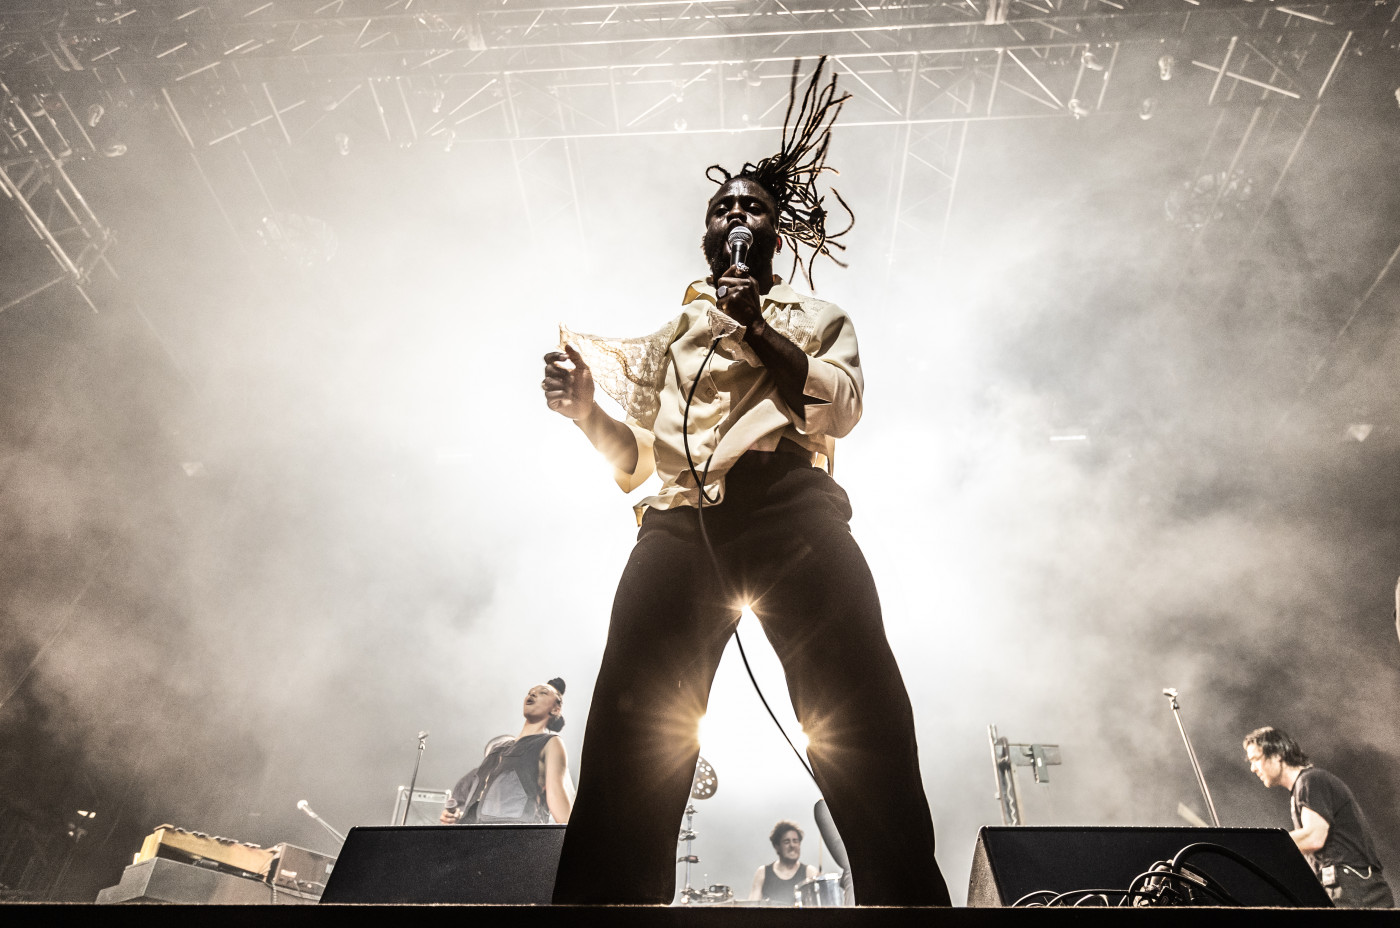 There are few live bands that can match the energy of Young Fathers. 